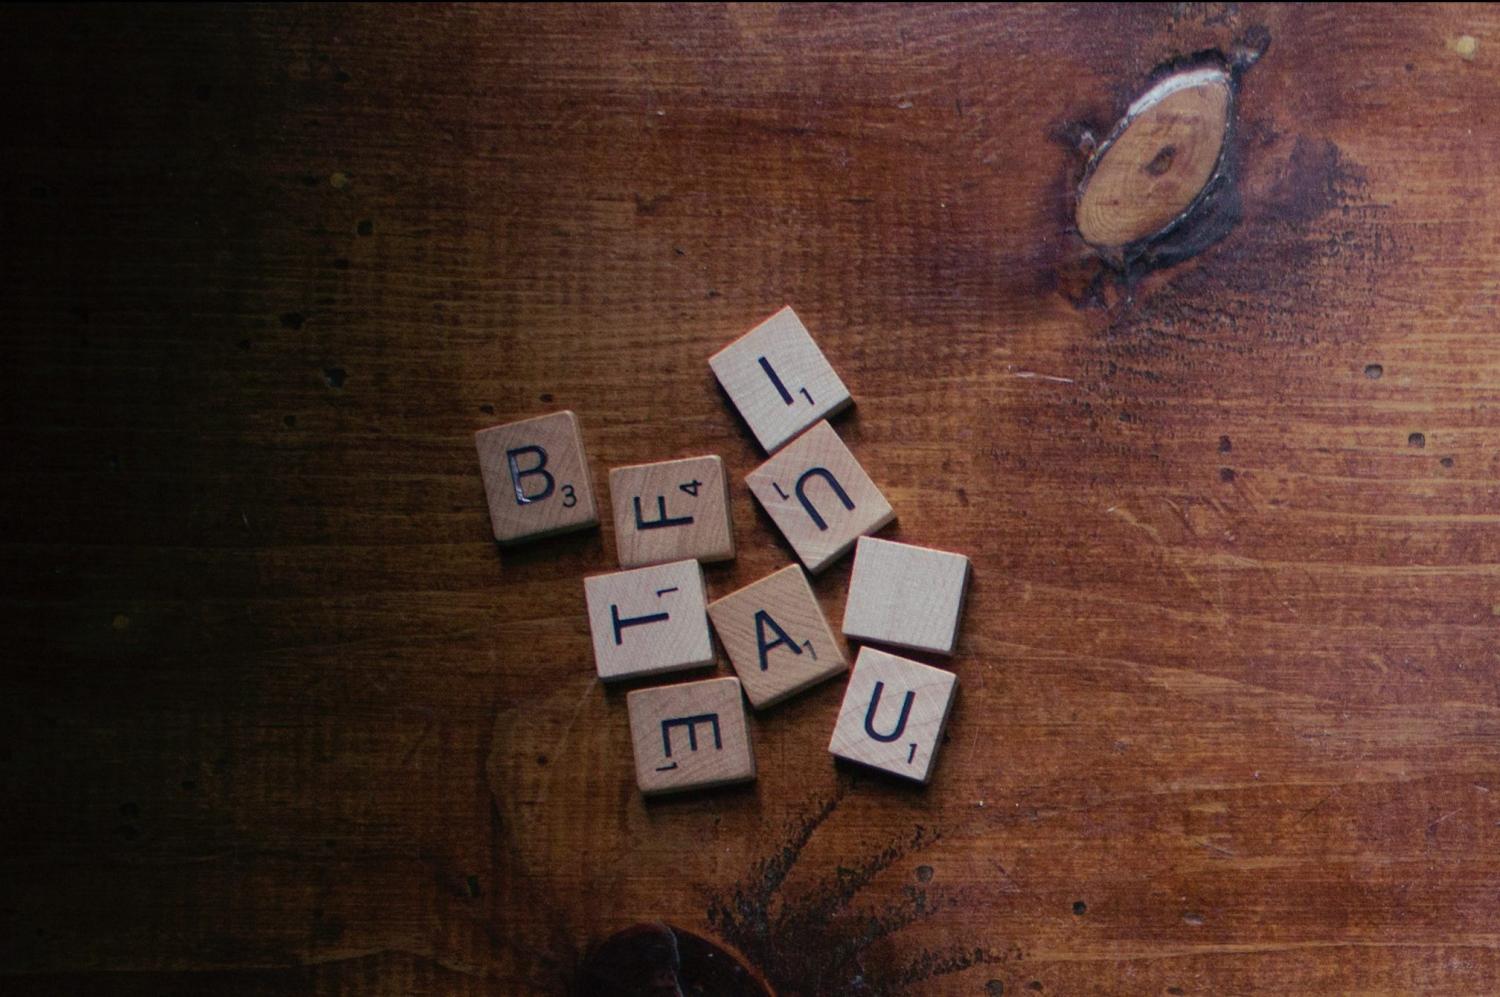 Scrabble pieces lying on a wooden table